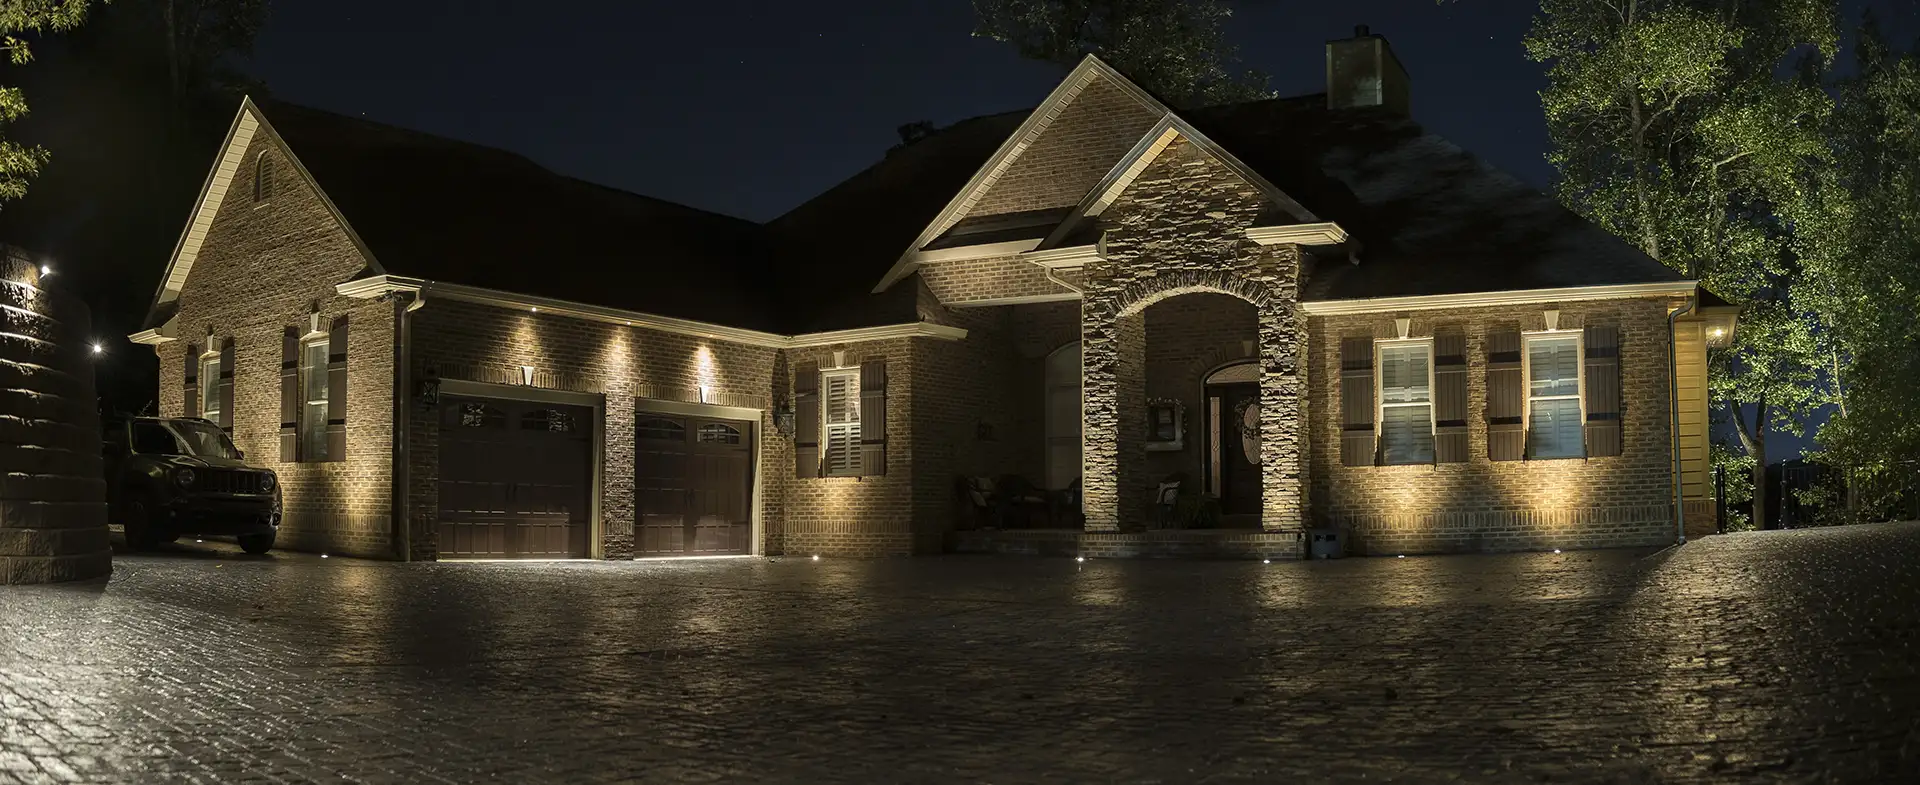 Farmer residence image 4 driveway garage Lighthouse Outdoor Lighting and Audio Knoxville TN